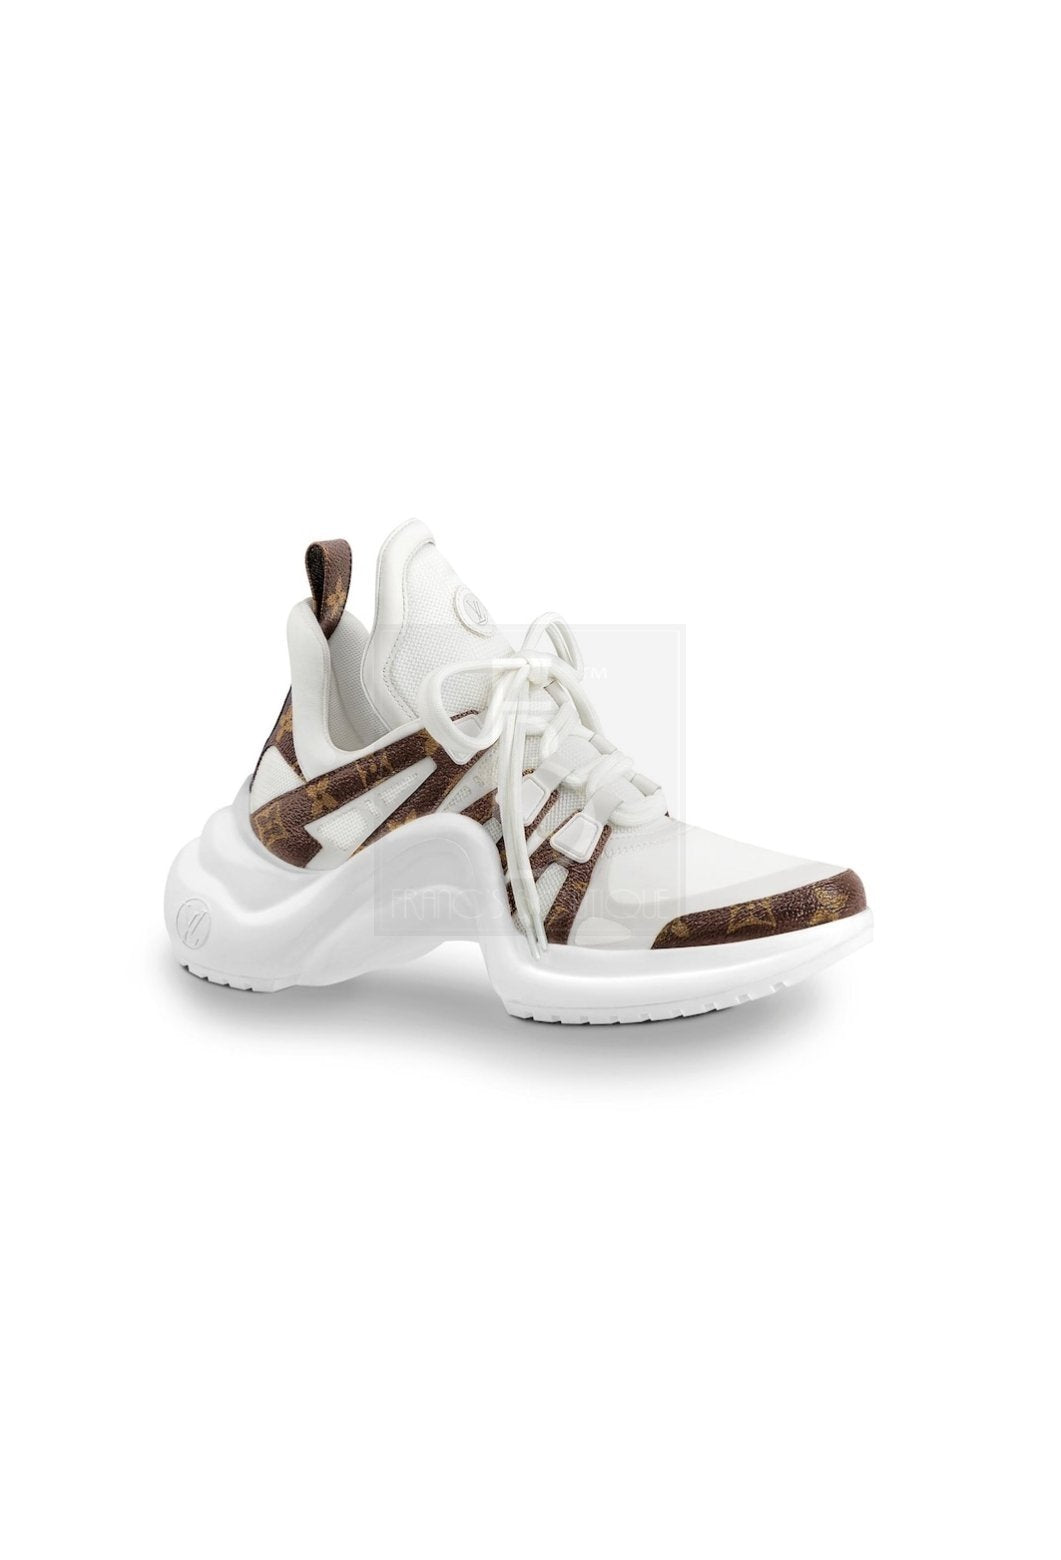 louis vuitton shoes price in rands